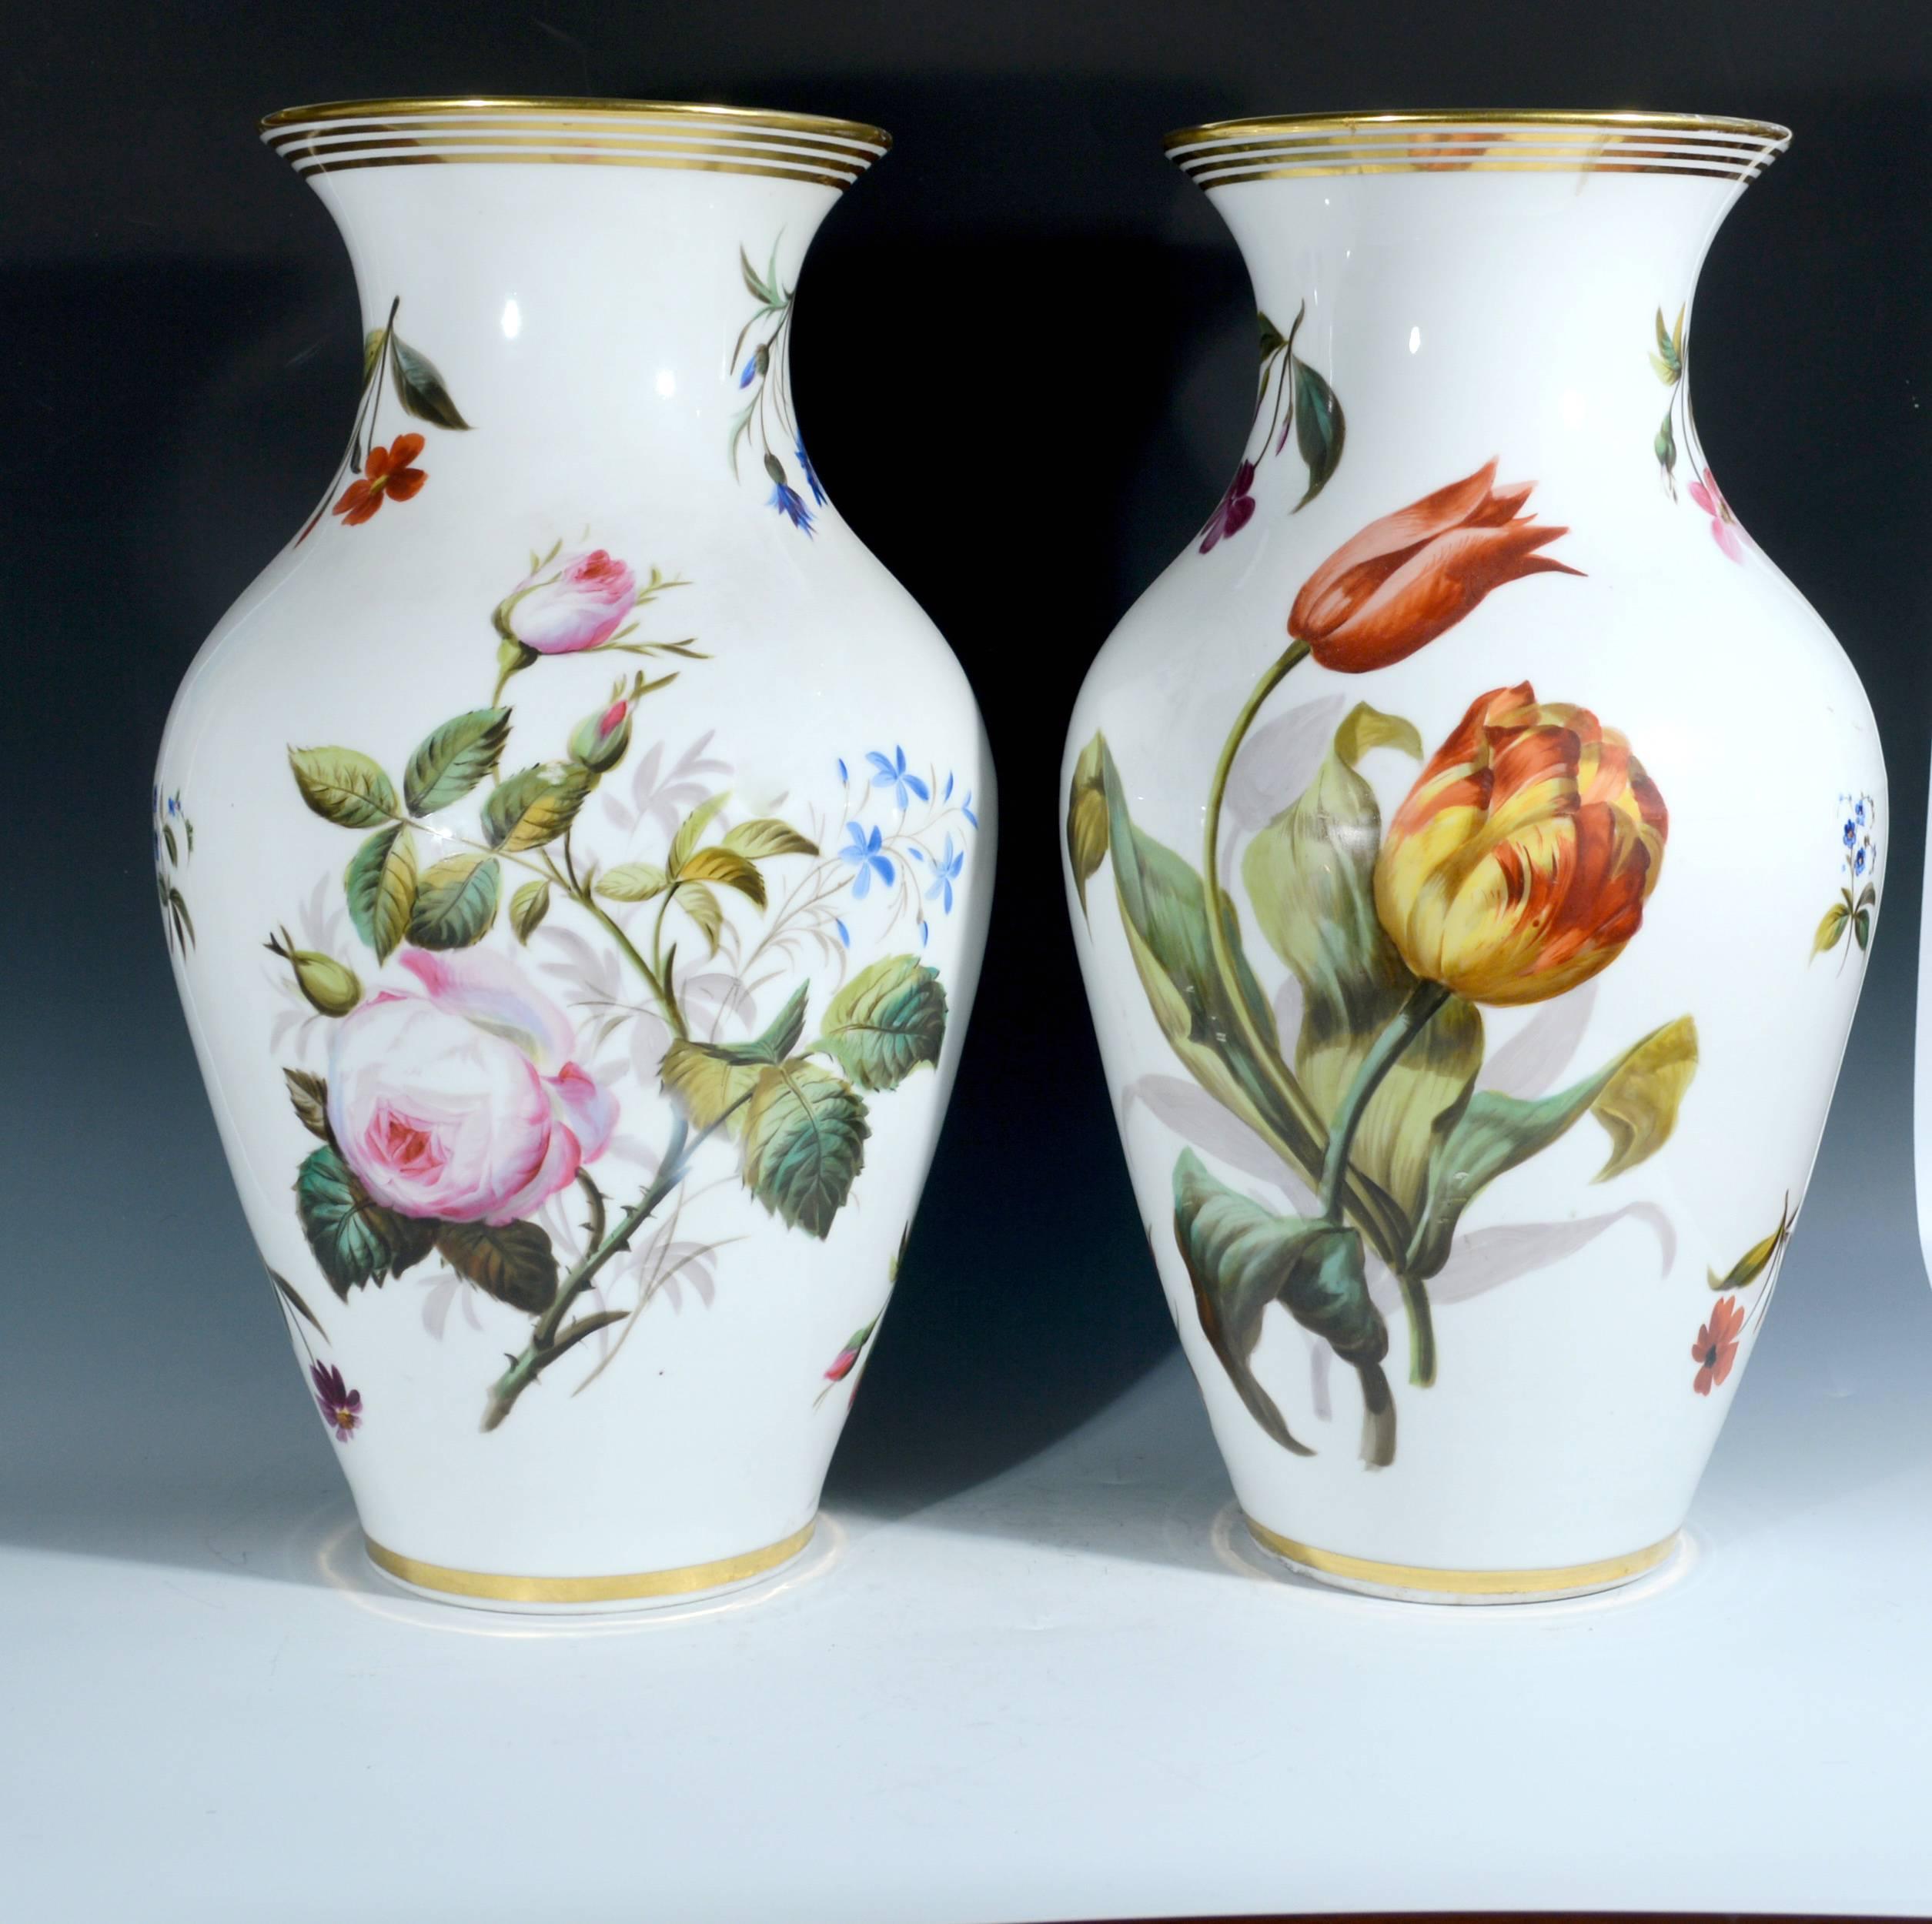 Pair of Paris porcelain botanical vases,
Mid-19th century.

Each of the baluster form vases has a cylindrical neck and everted rim and is painted with floral bouquets on a white ground. On the reverse, each has a large single-flower specimen.